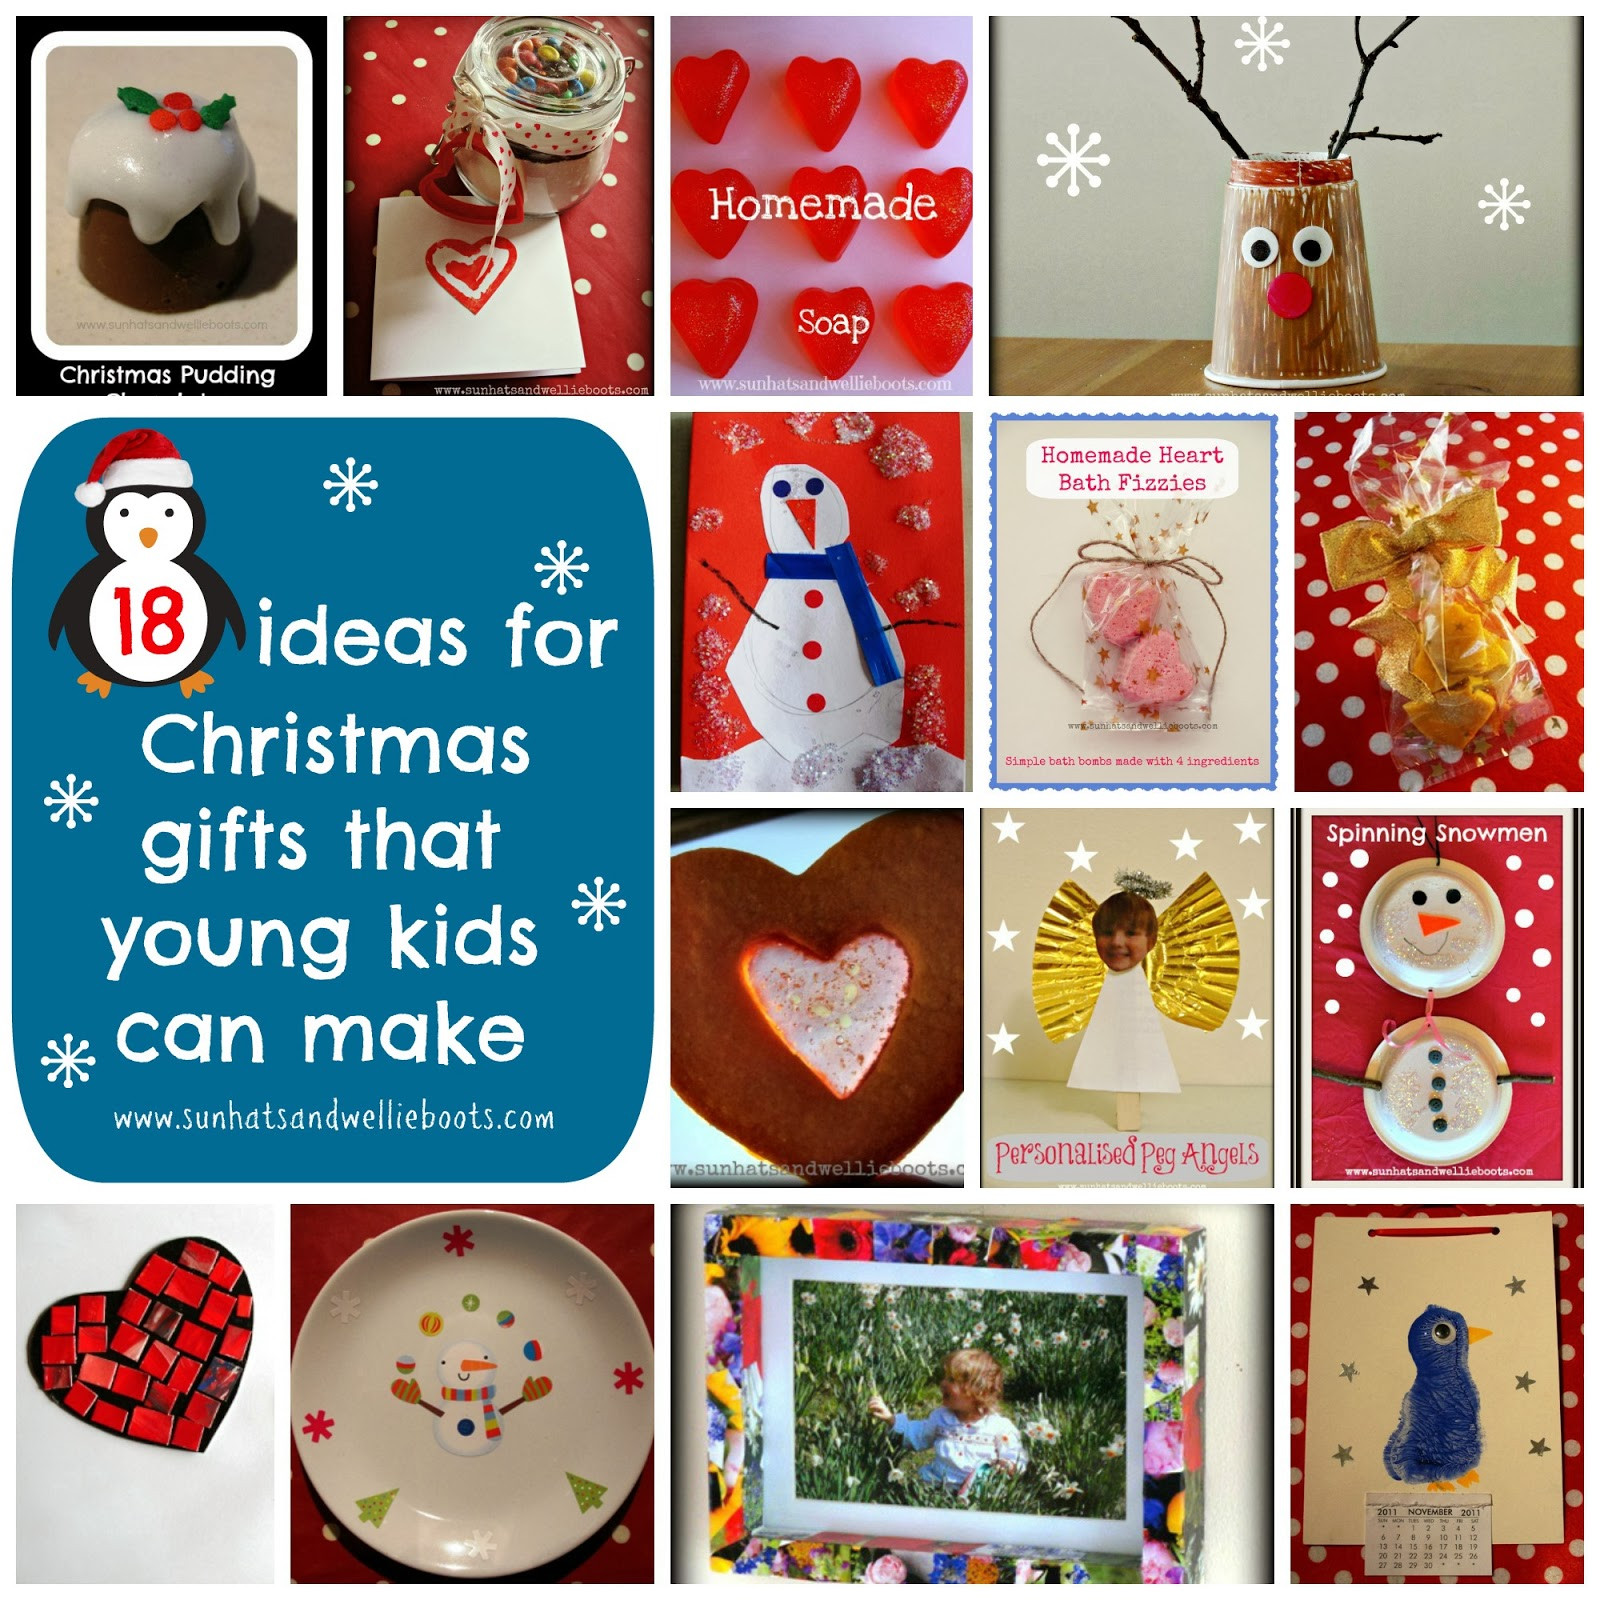 DIY Gifts For Kids To Make
 Sun Hats & Wellie Boots 18 Homemade Christmas Gifts That